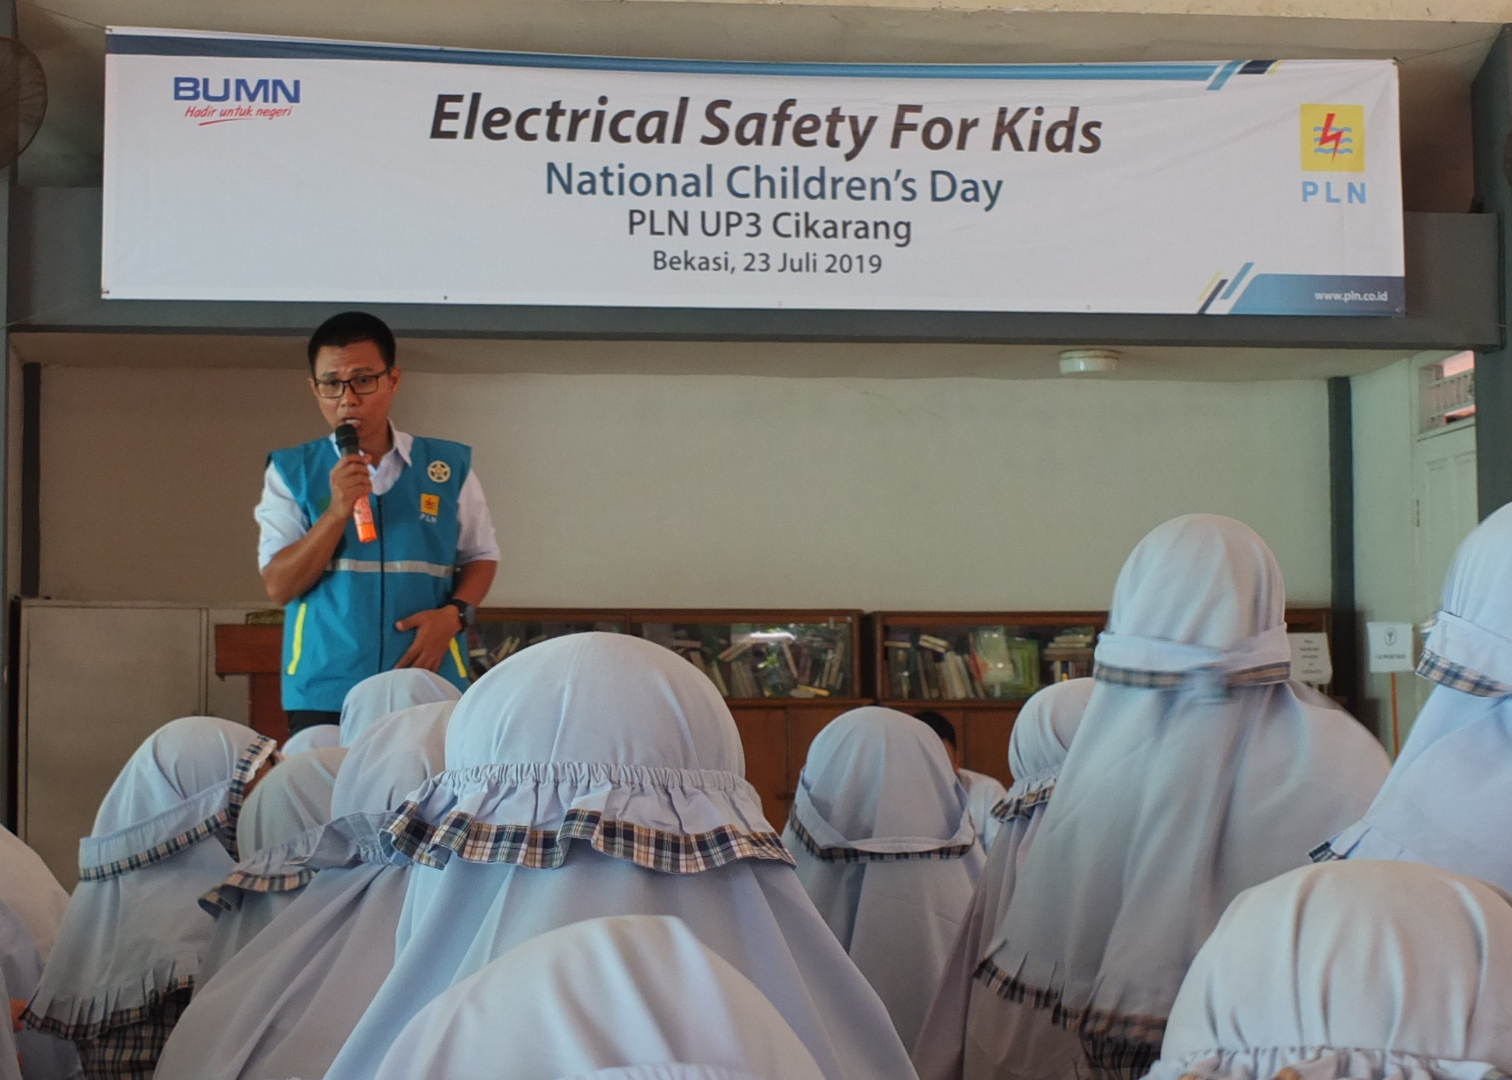 Electrical Safety For Kids oleh PLN